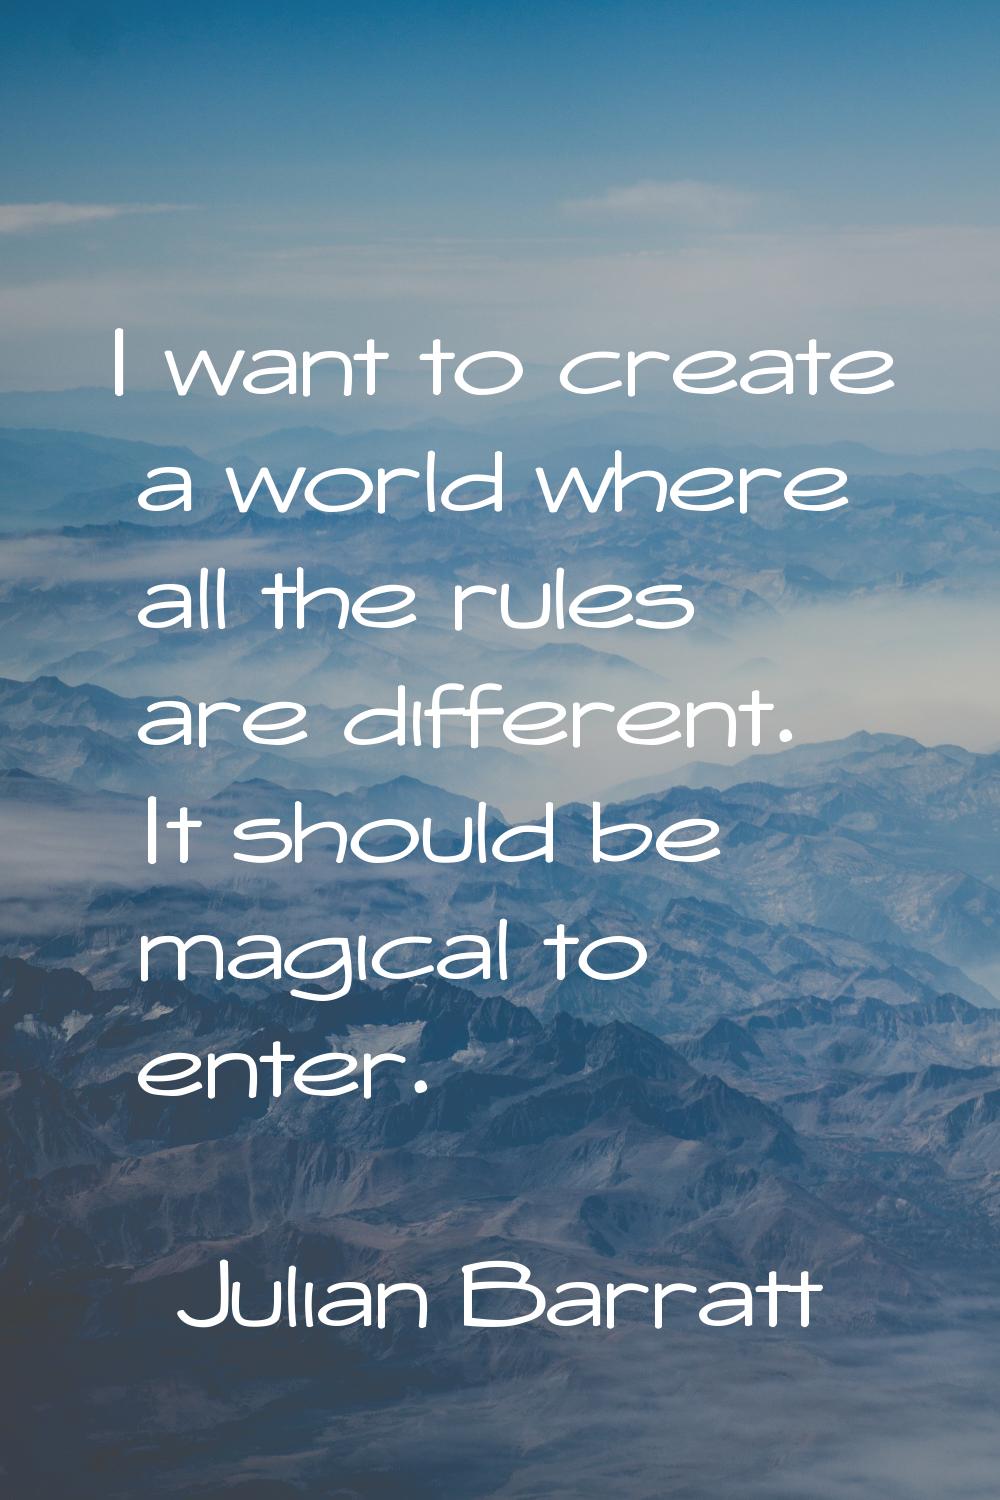 I want to create a world where all the rules are different. It should be magical to enter.